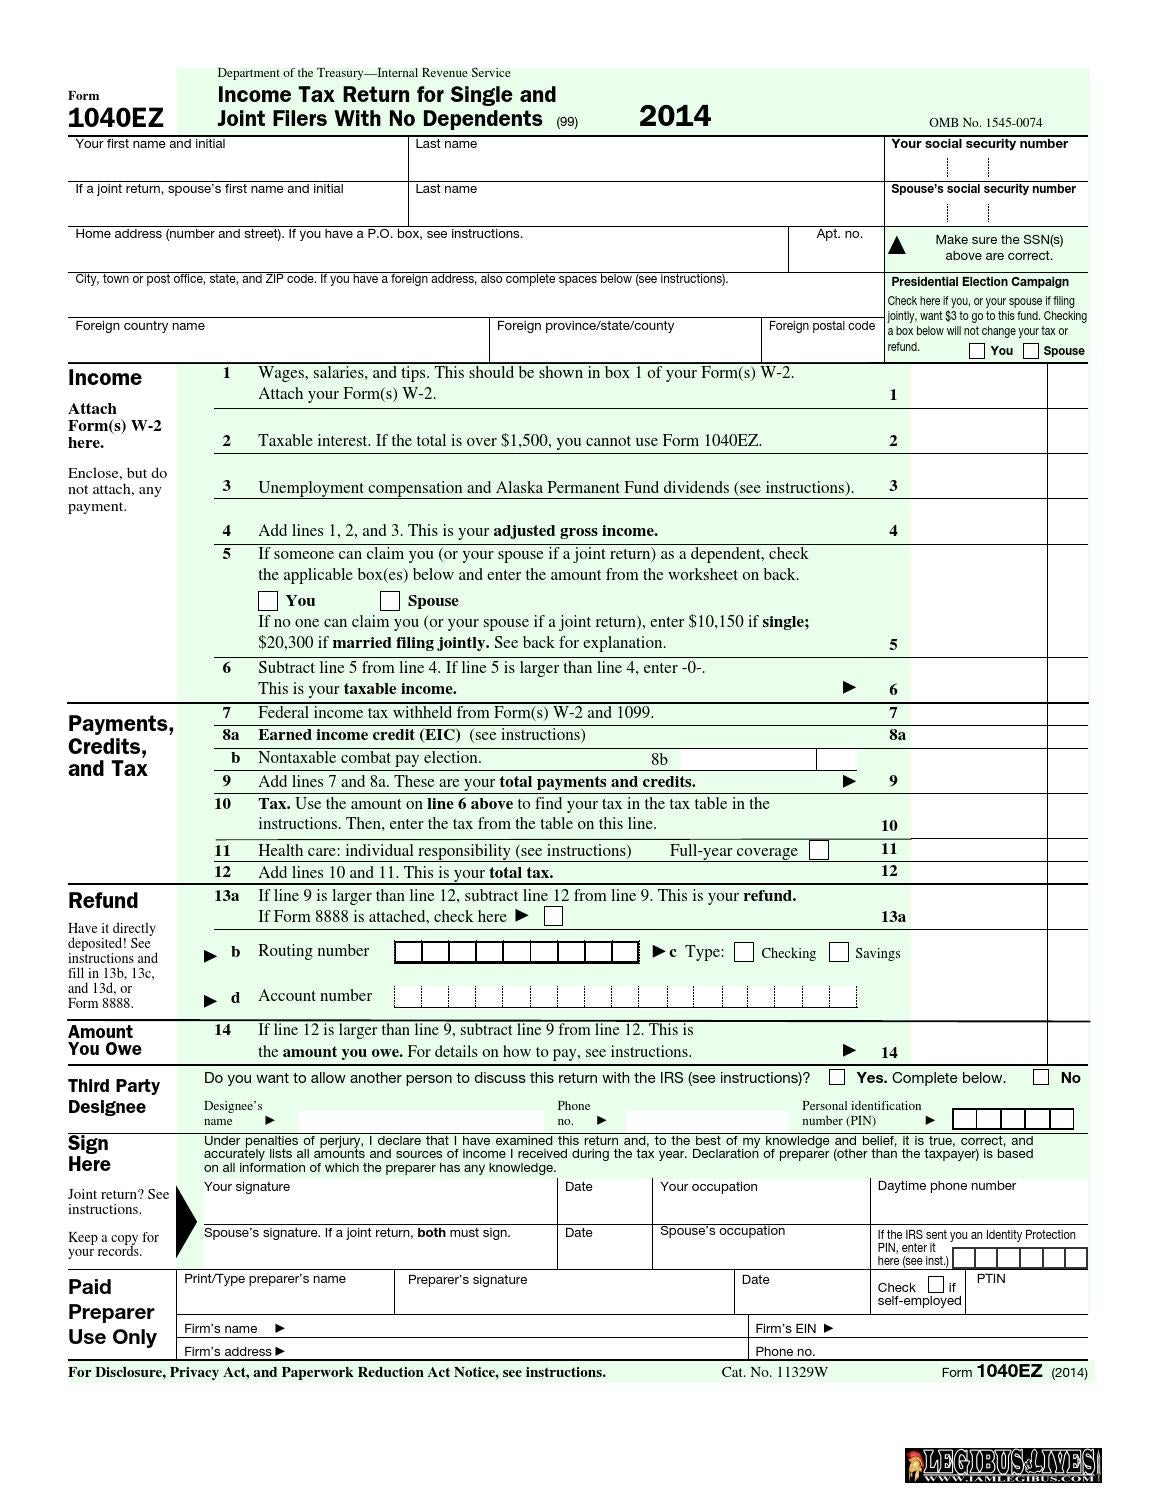 income tax return instructions 2009